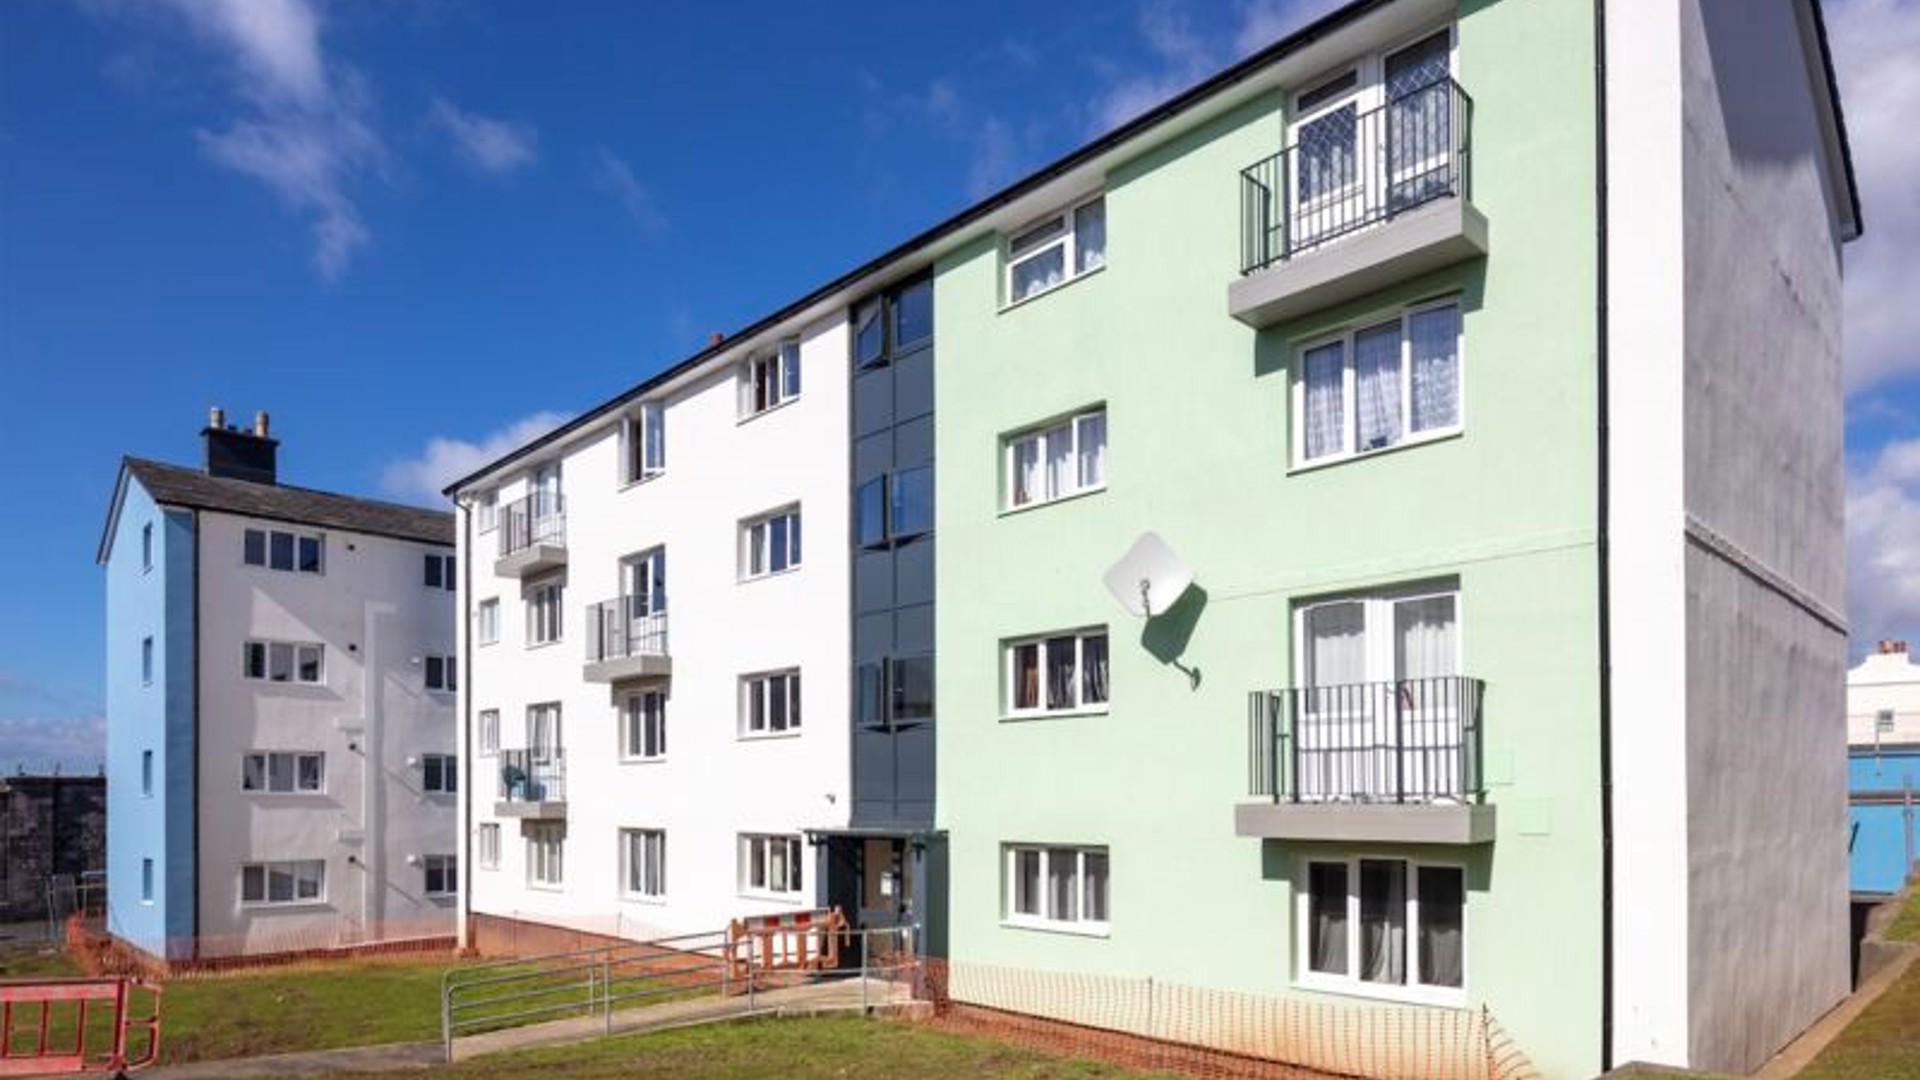 Refurb Of Plymouth Flats Completed As Part Of Energy Efficiency Plans 03